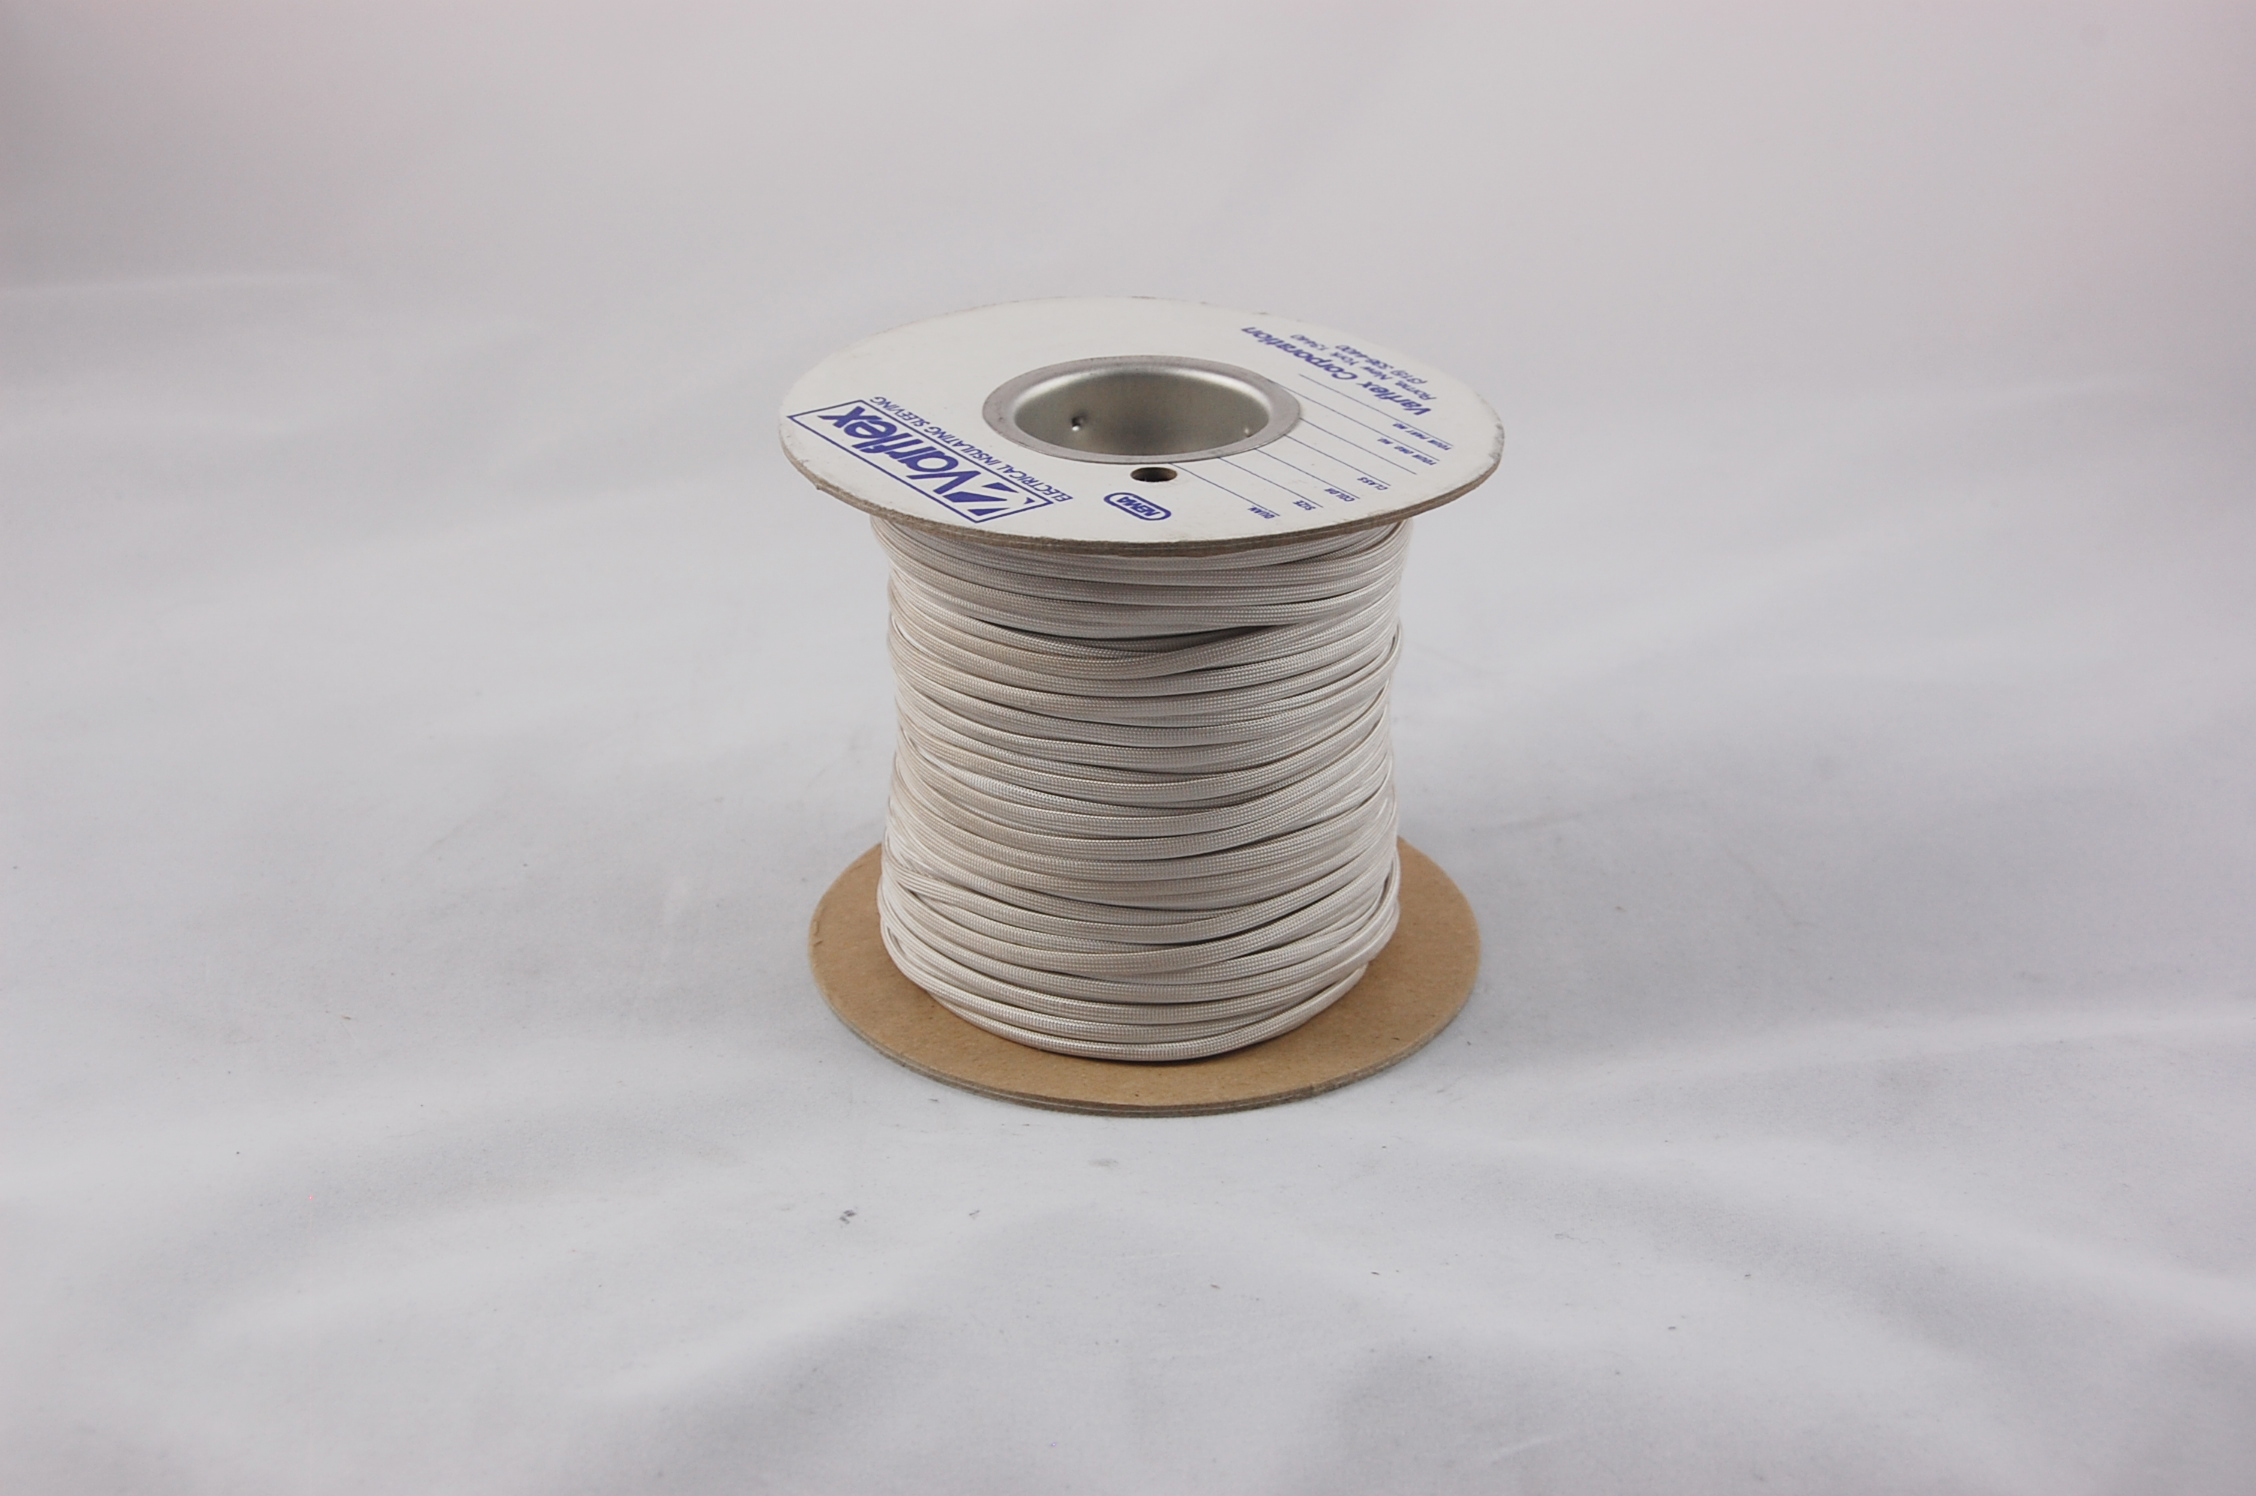 1" AWG Varglas Type H Heat-Cleaned High Temperature Non-Fray Flexible Fiberglass Sleeving , natural, 100 FT per spool